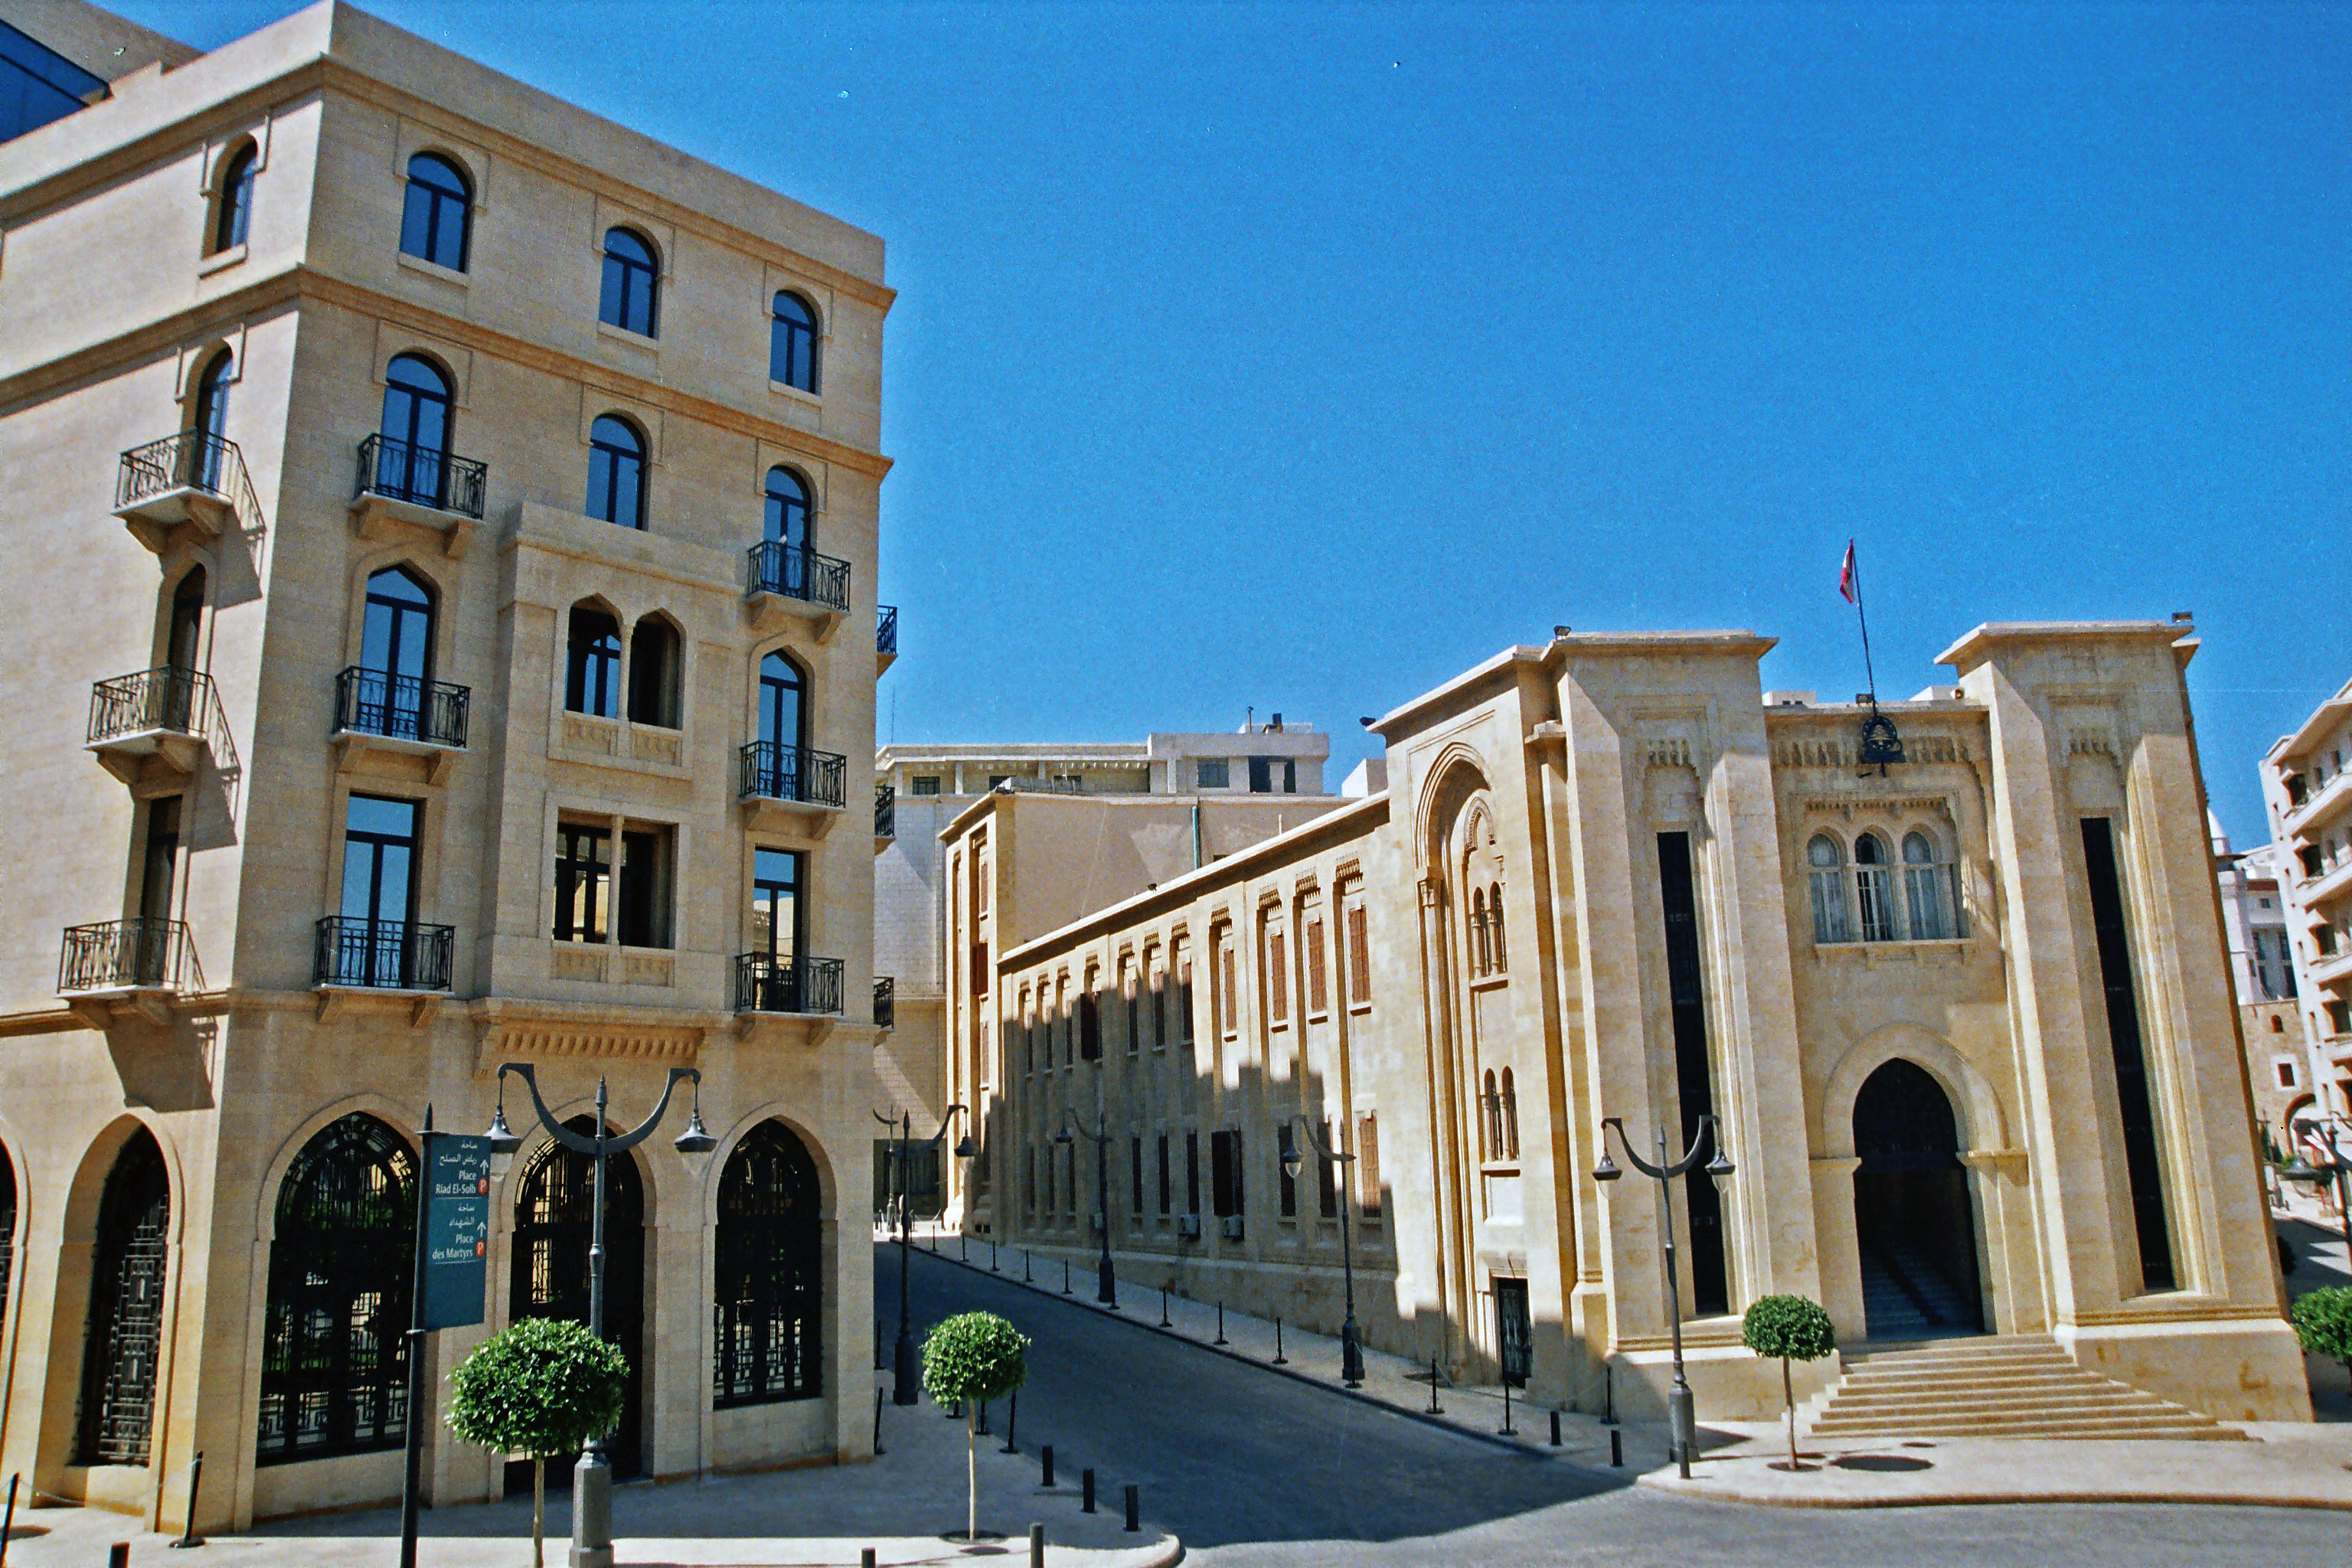 The Lebanese parliament building